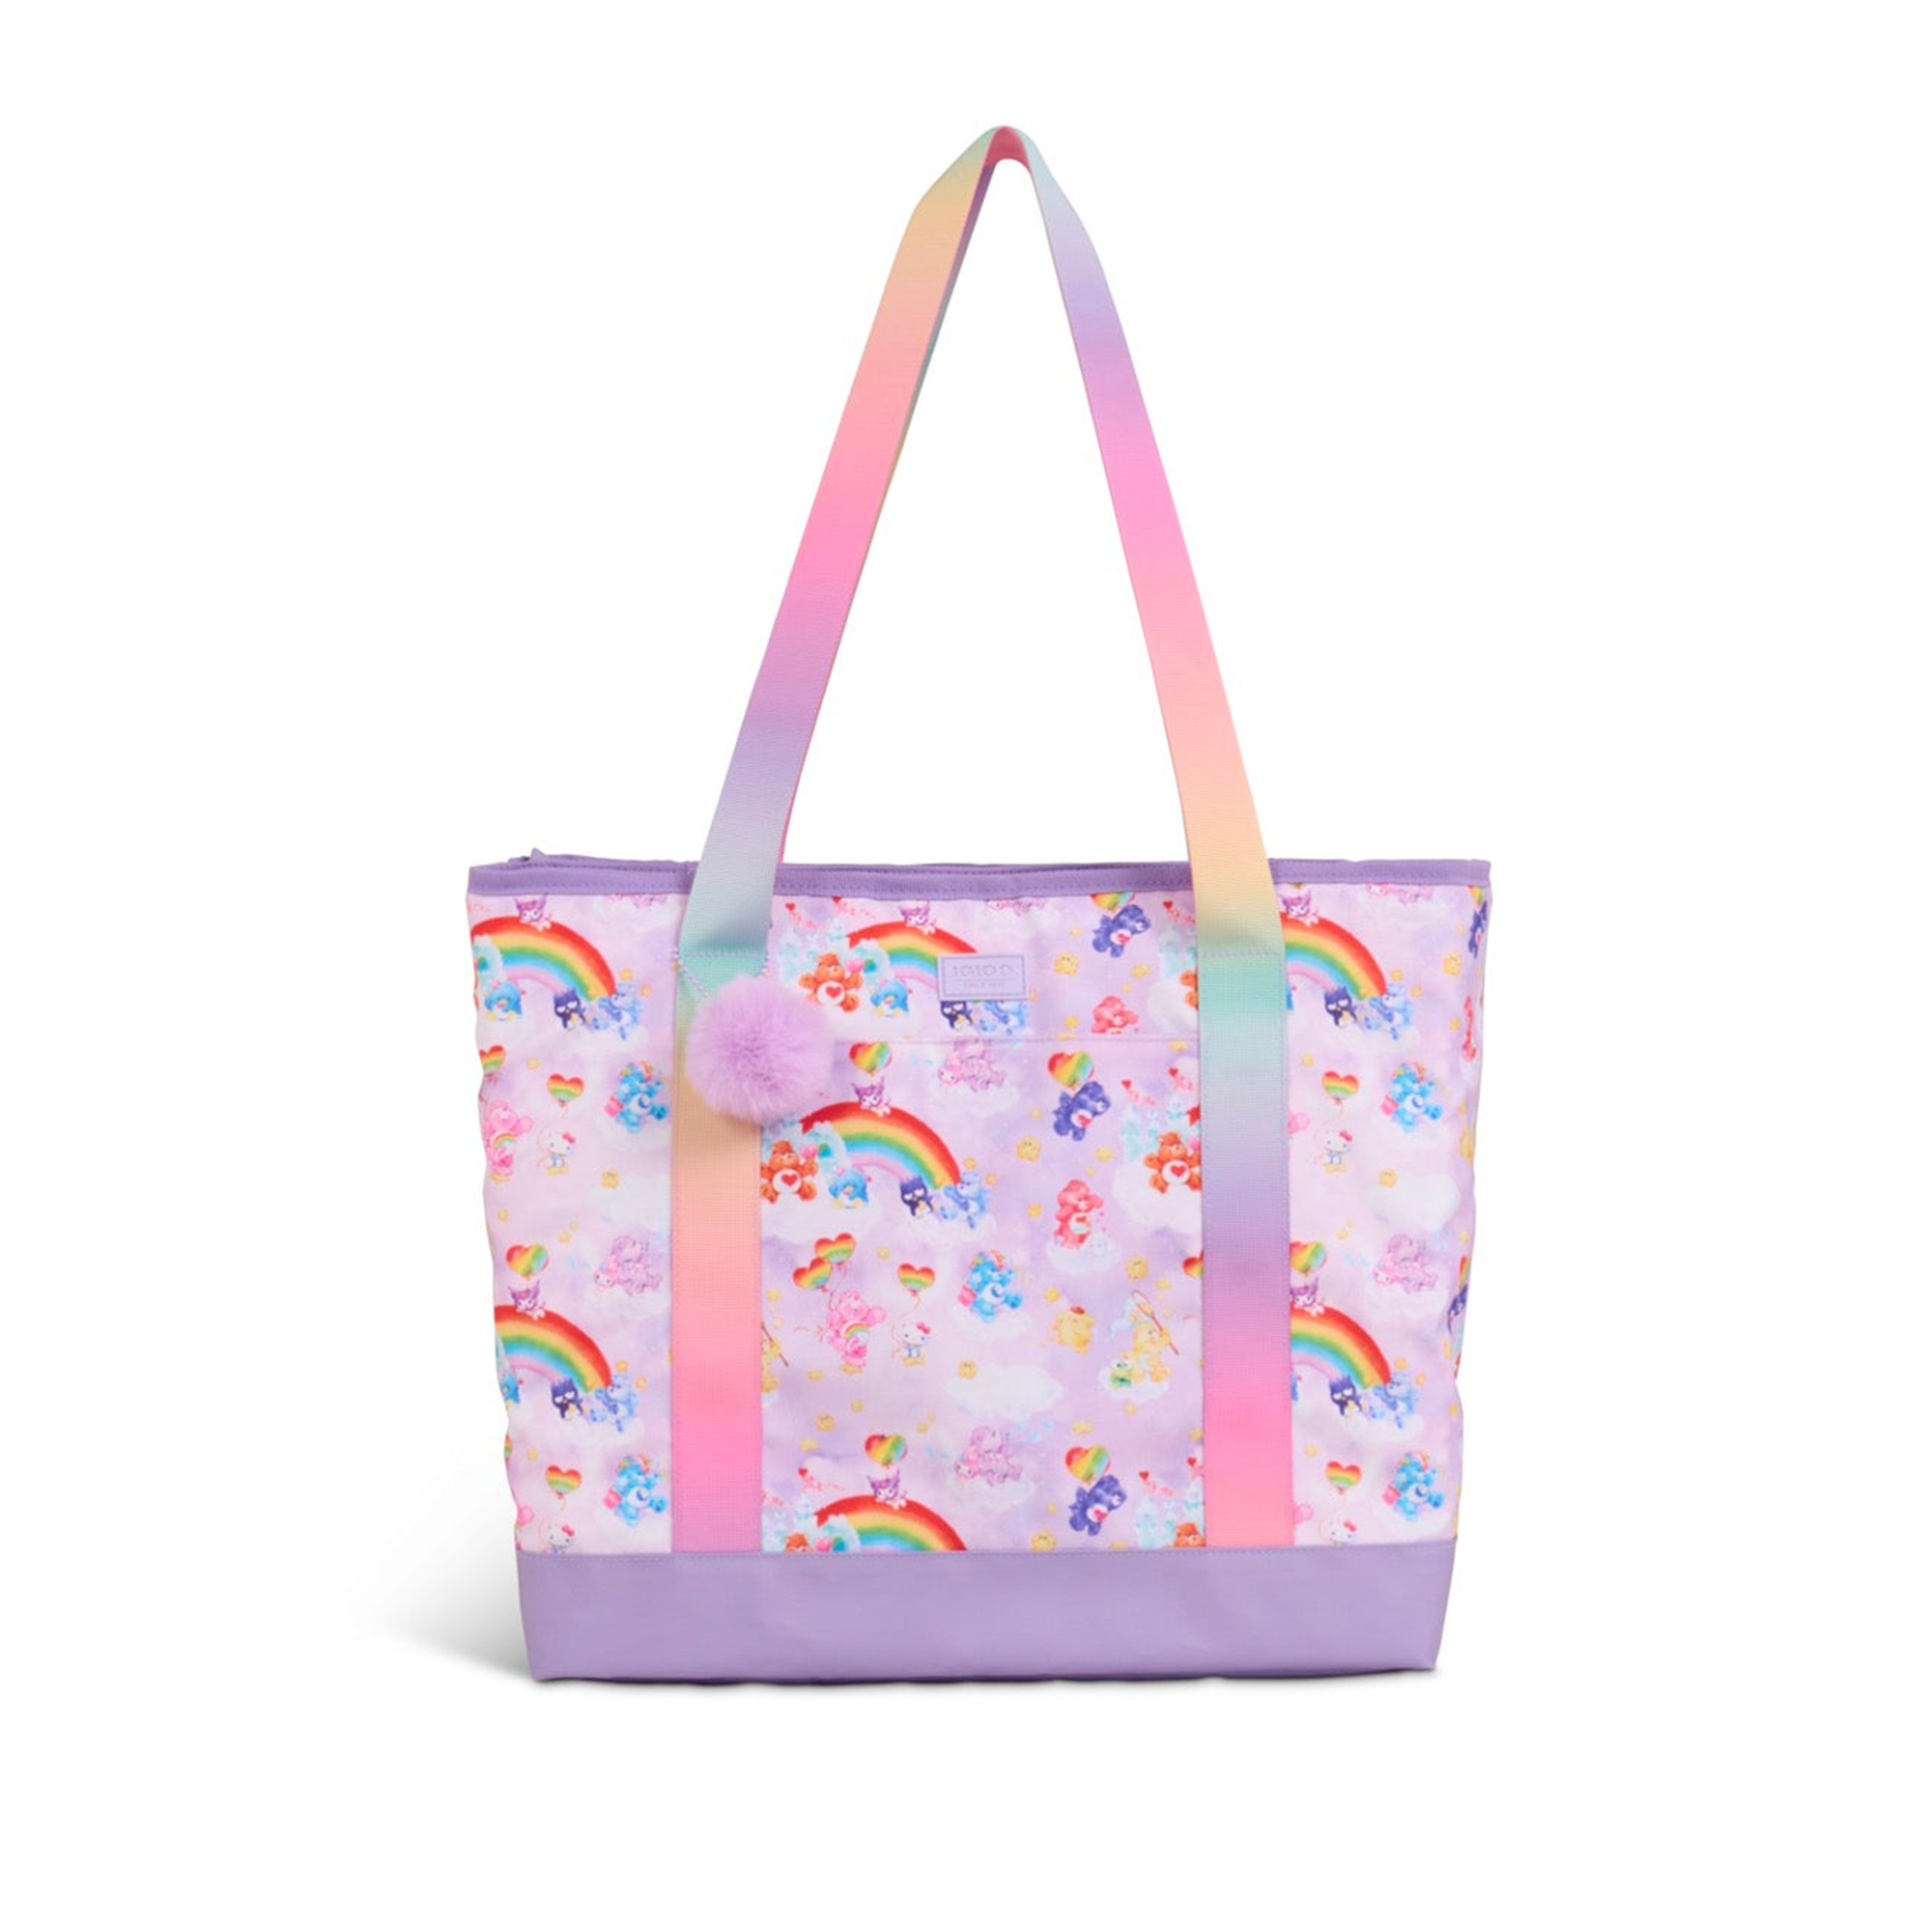 Hello Kitty and Friends x Care Bears Igloo Dual Tote Bag Cooler Travel Igloo Products Corp   